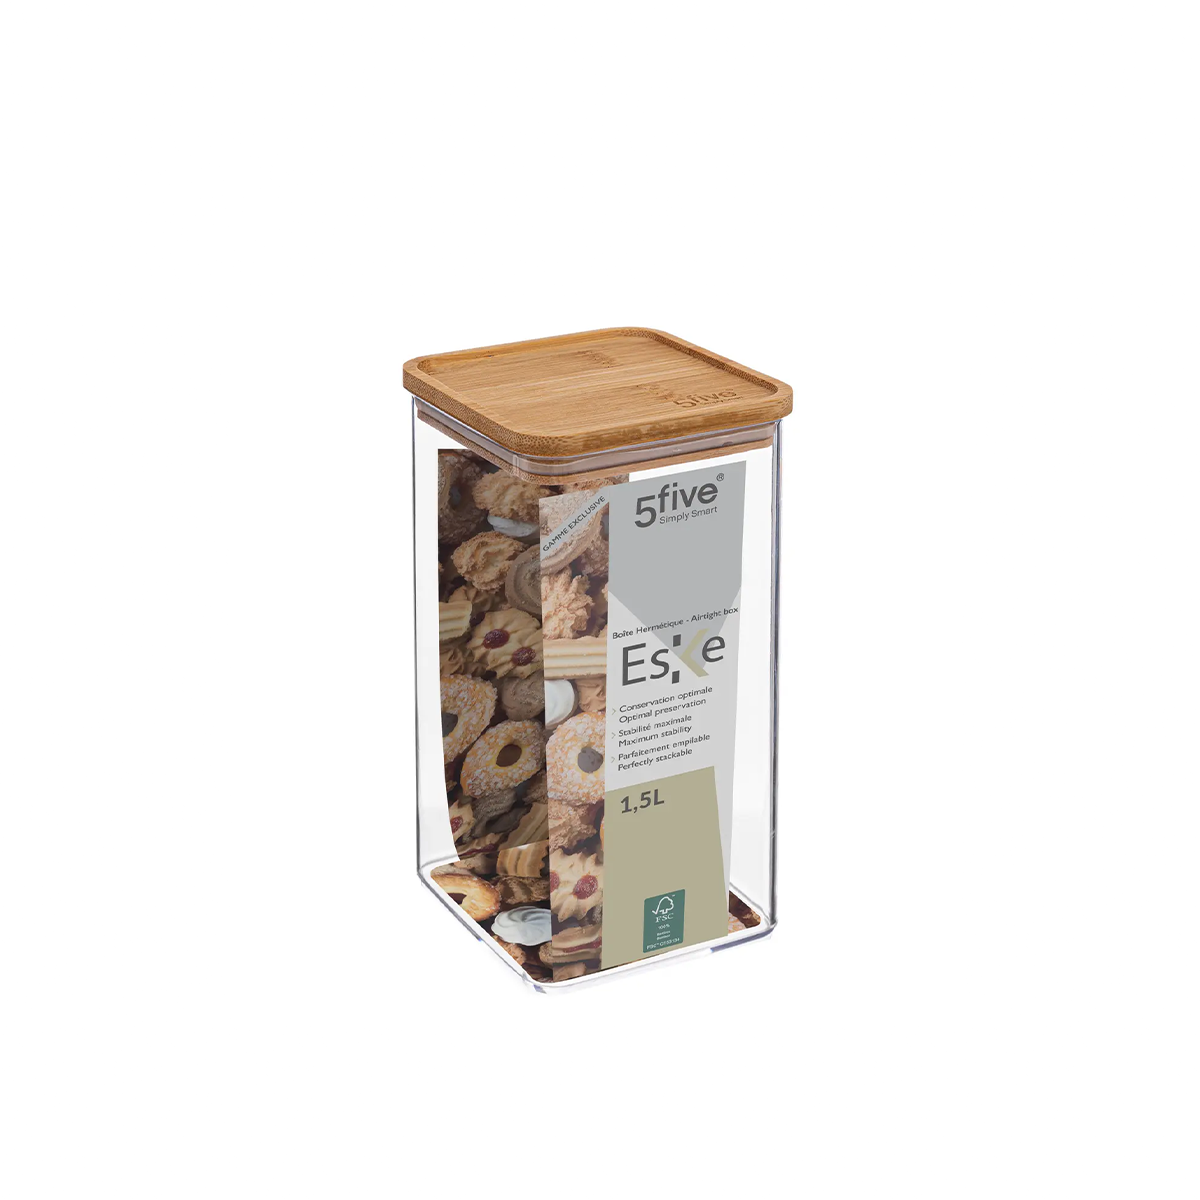 5 Five Simply Smart Plastic Container With Bamboo Lid 1.5 L -   – Online shop of Super chain stores